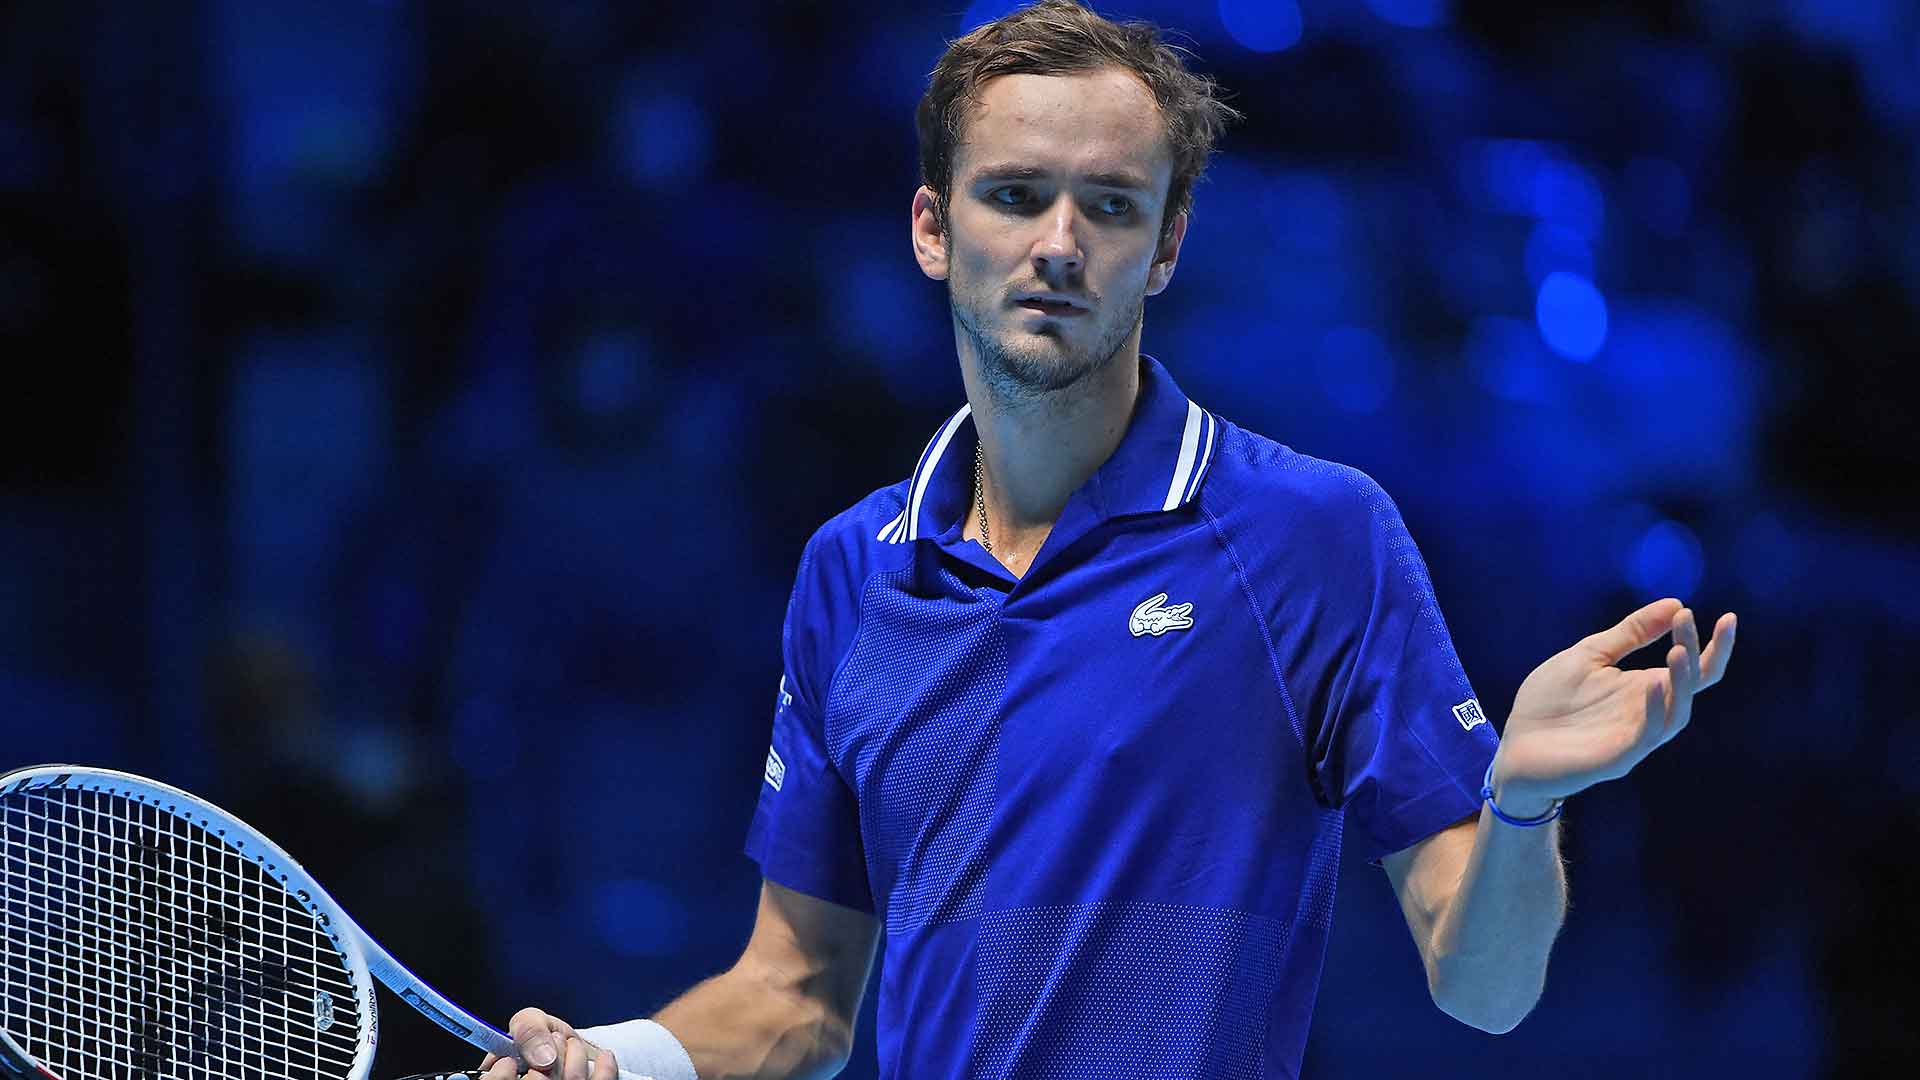 Medvedev: 'My Serve Didn't Really Have That Spark'